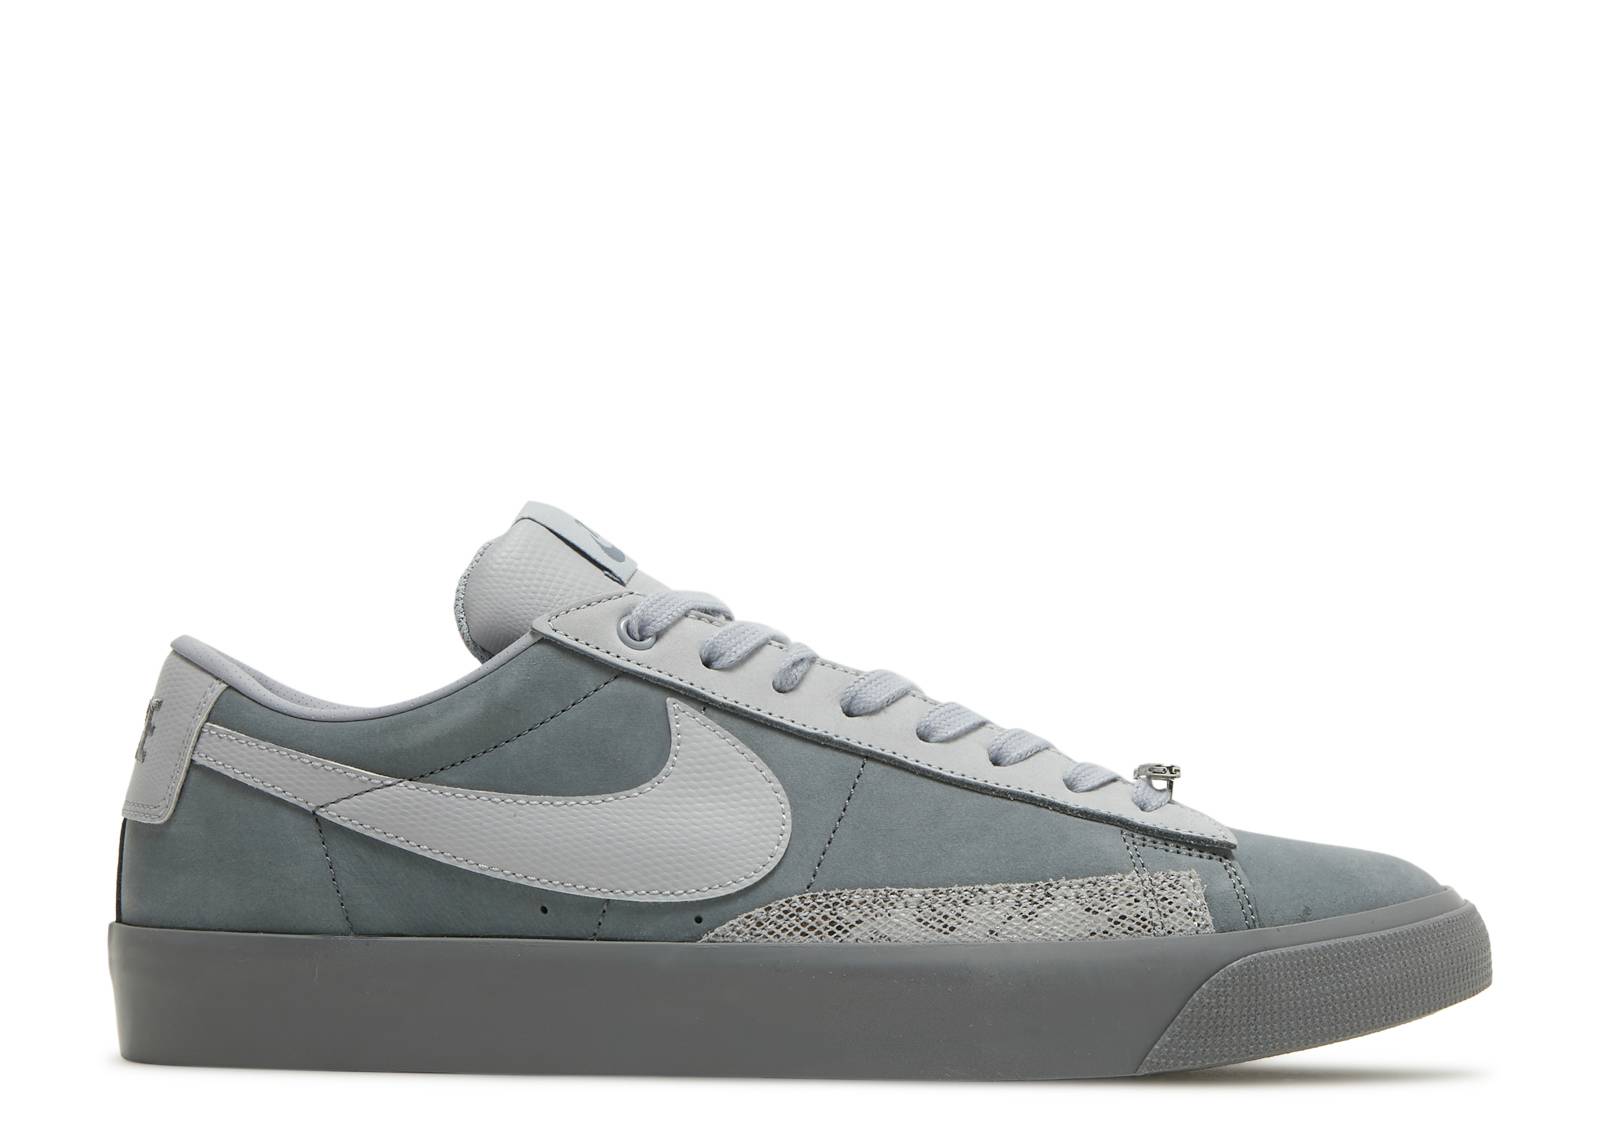 Forty Percent Against Rights x Blazer Low SB 'Cool Grey'